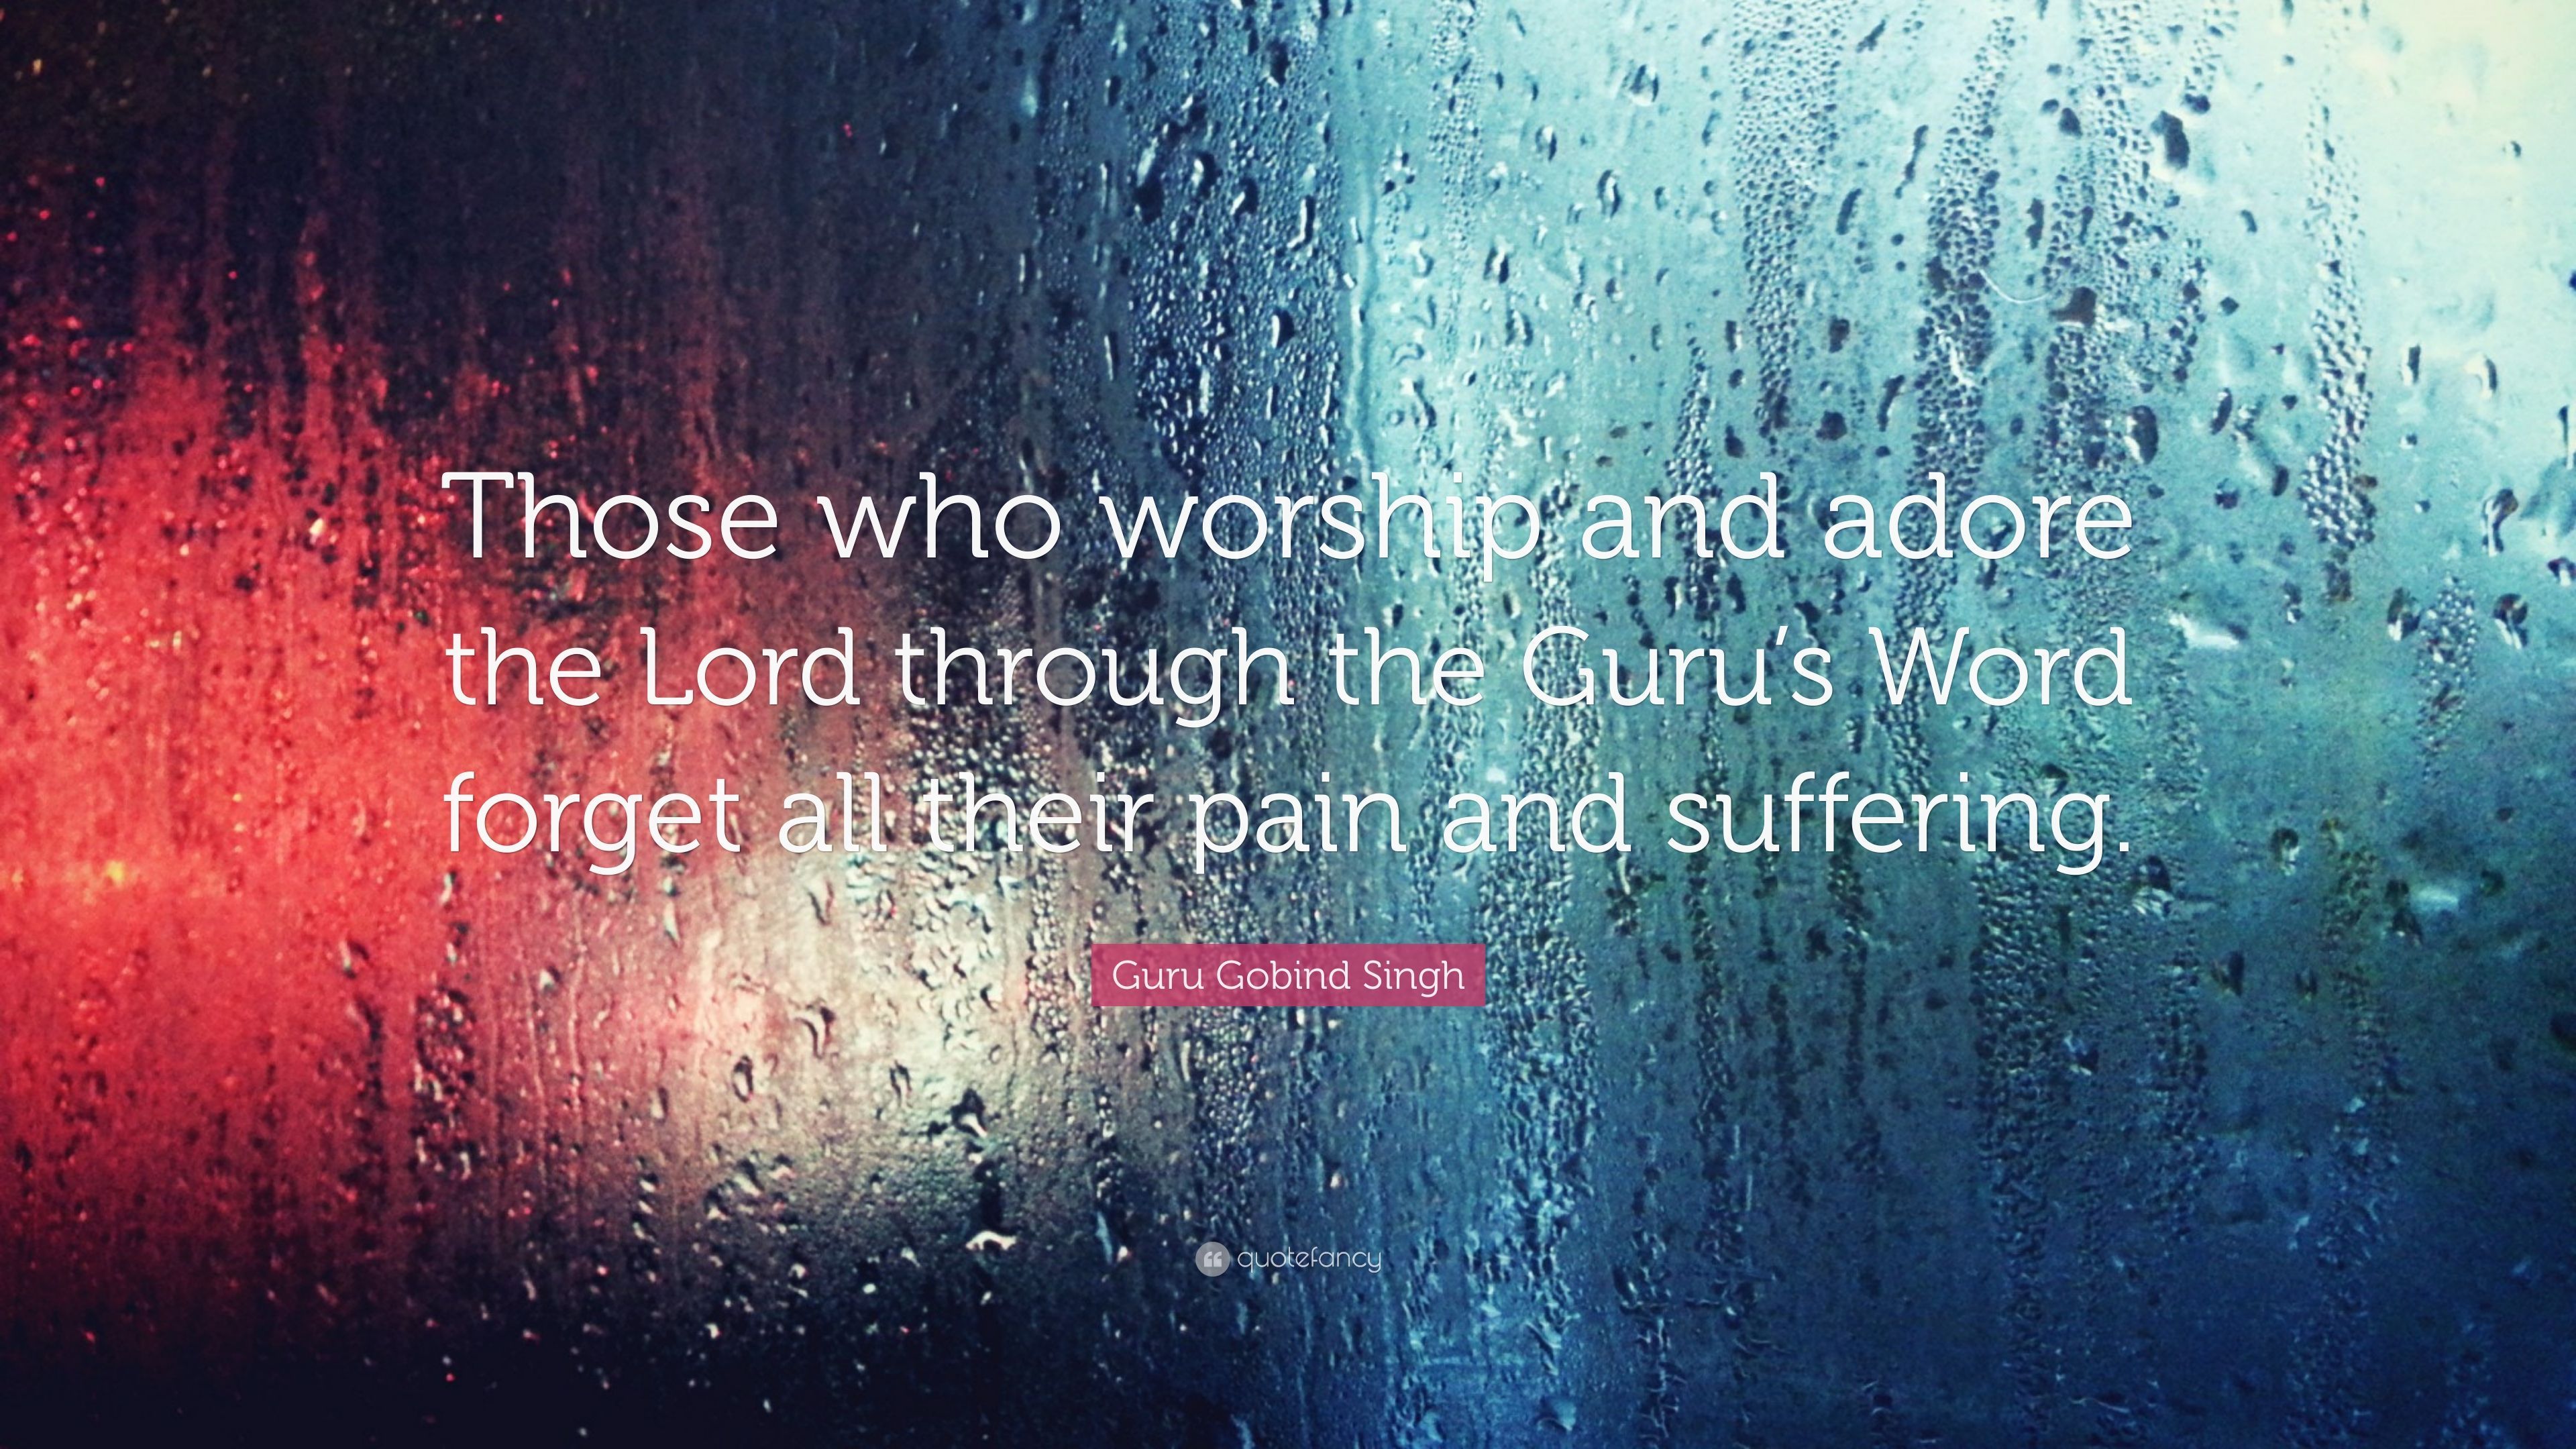 Guru Gobind Singh Quote: “Those who worship and adore the Lord